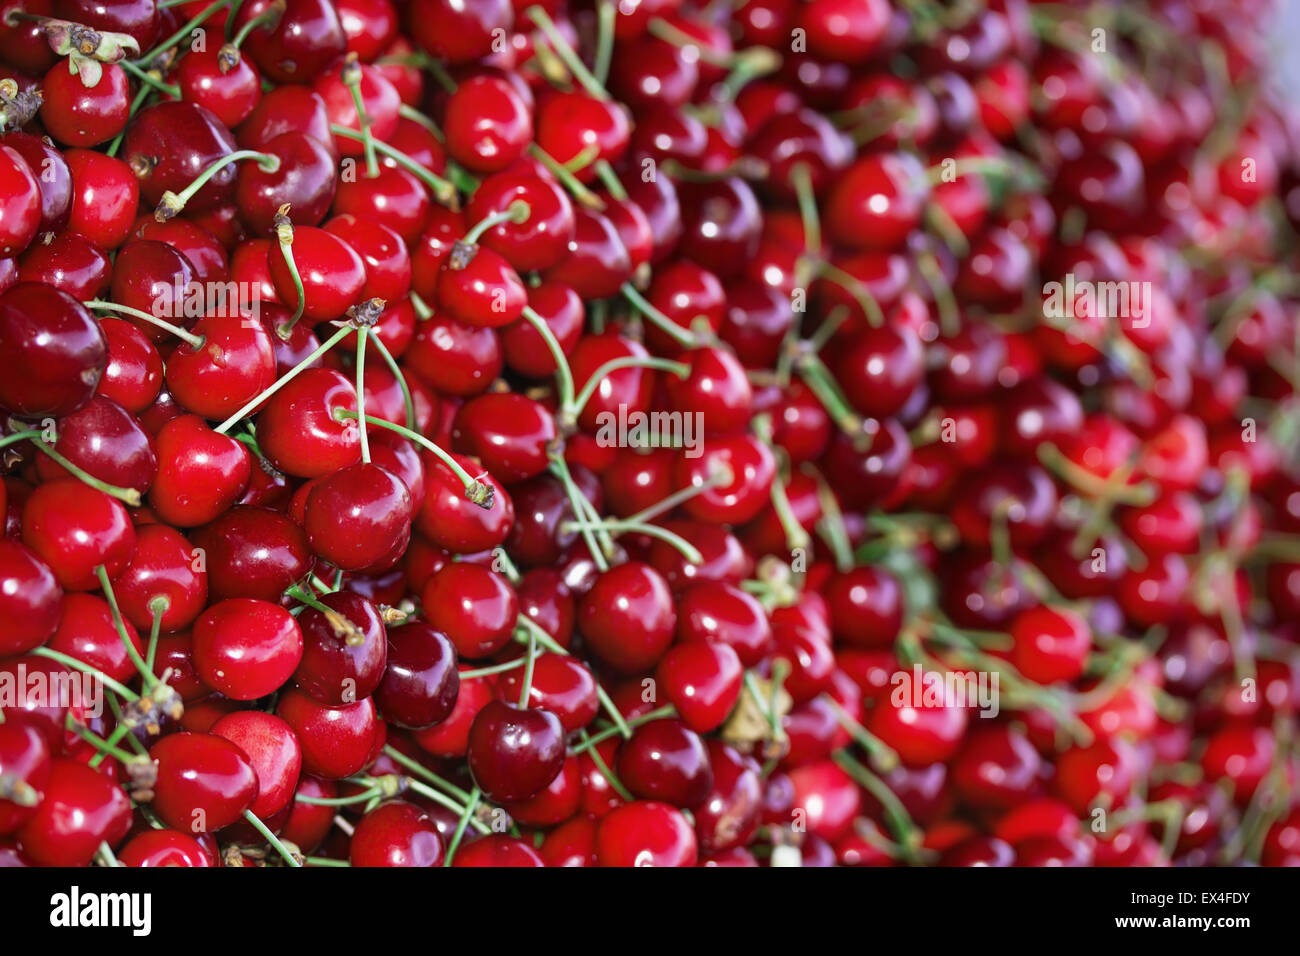 red ripe cherries with petals. Stock Photo